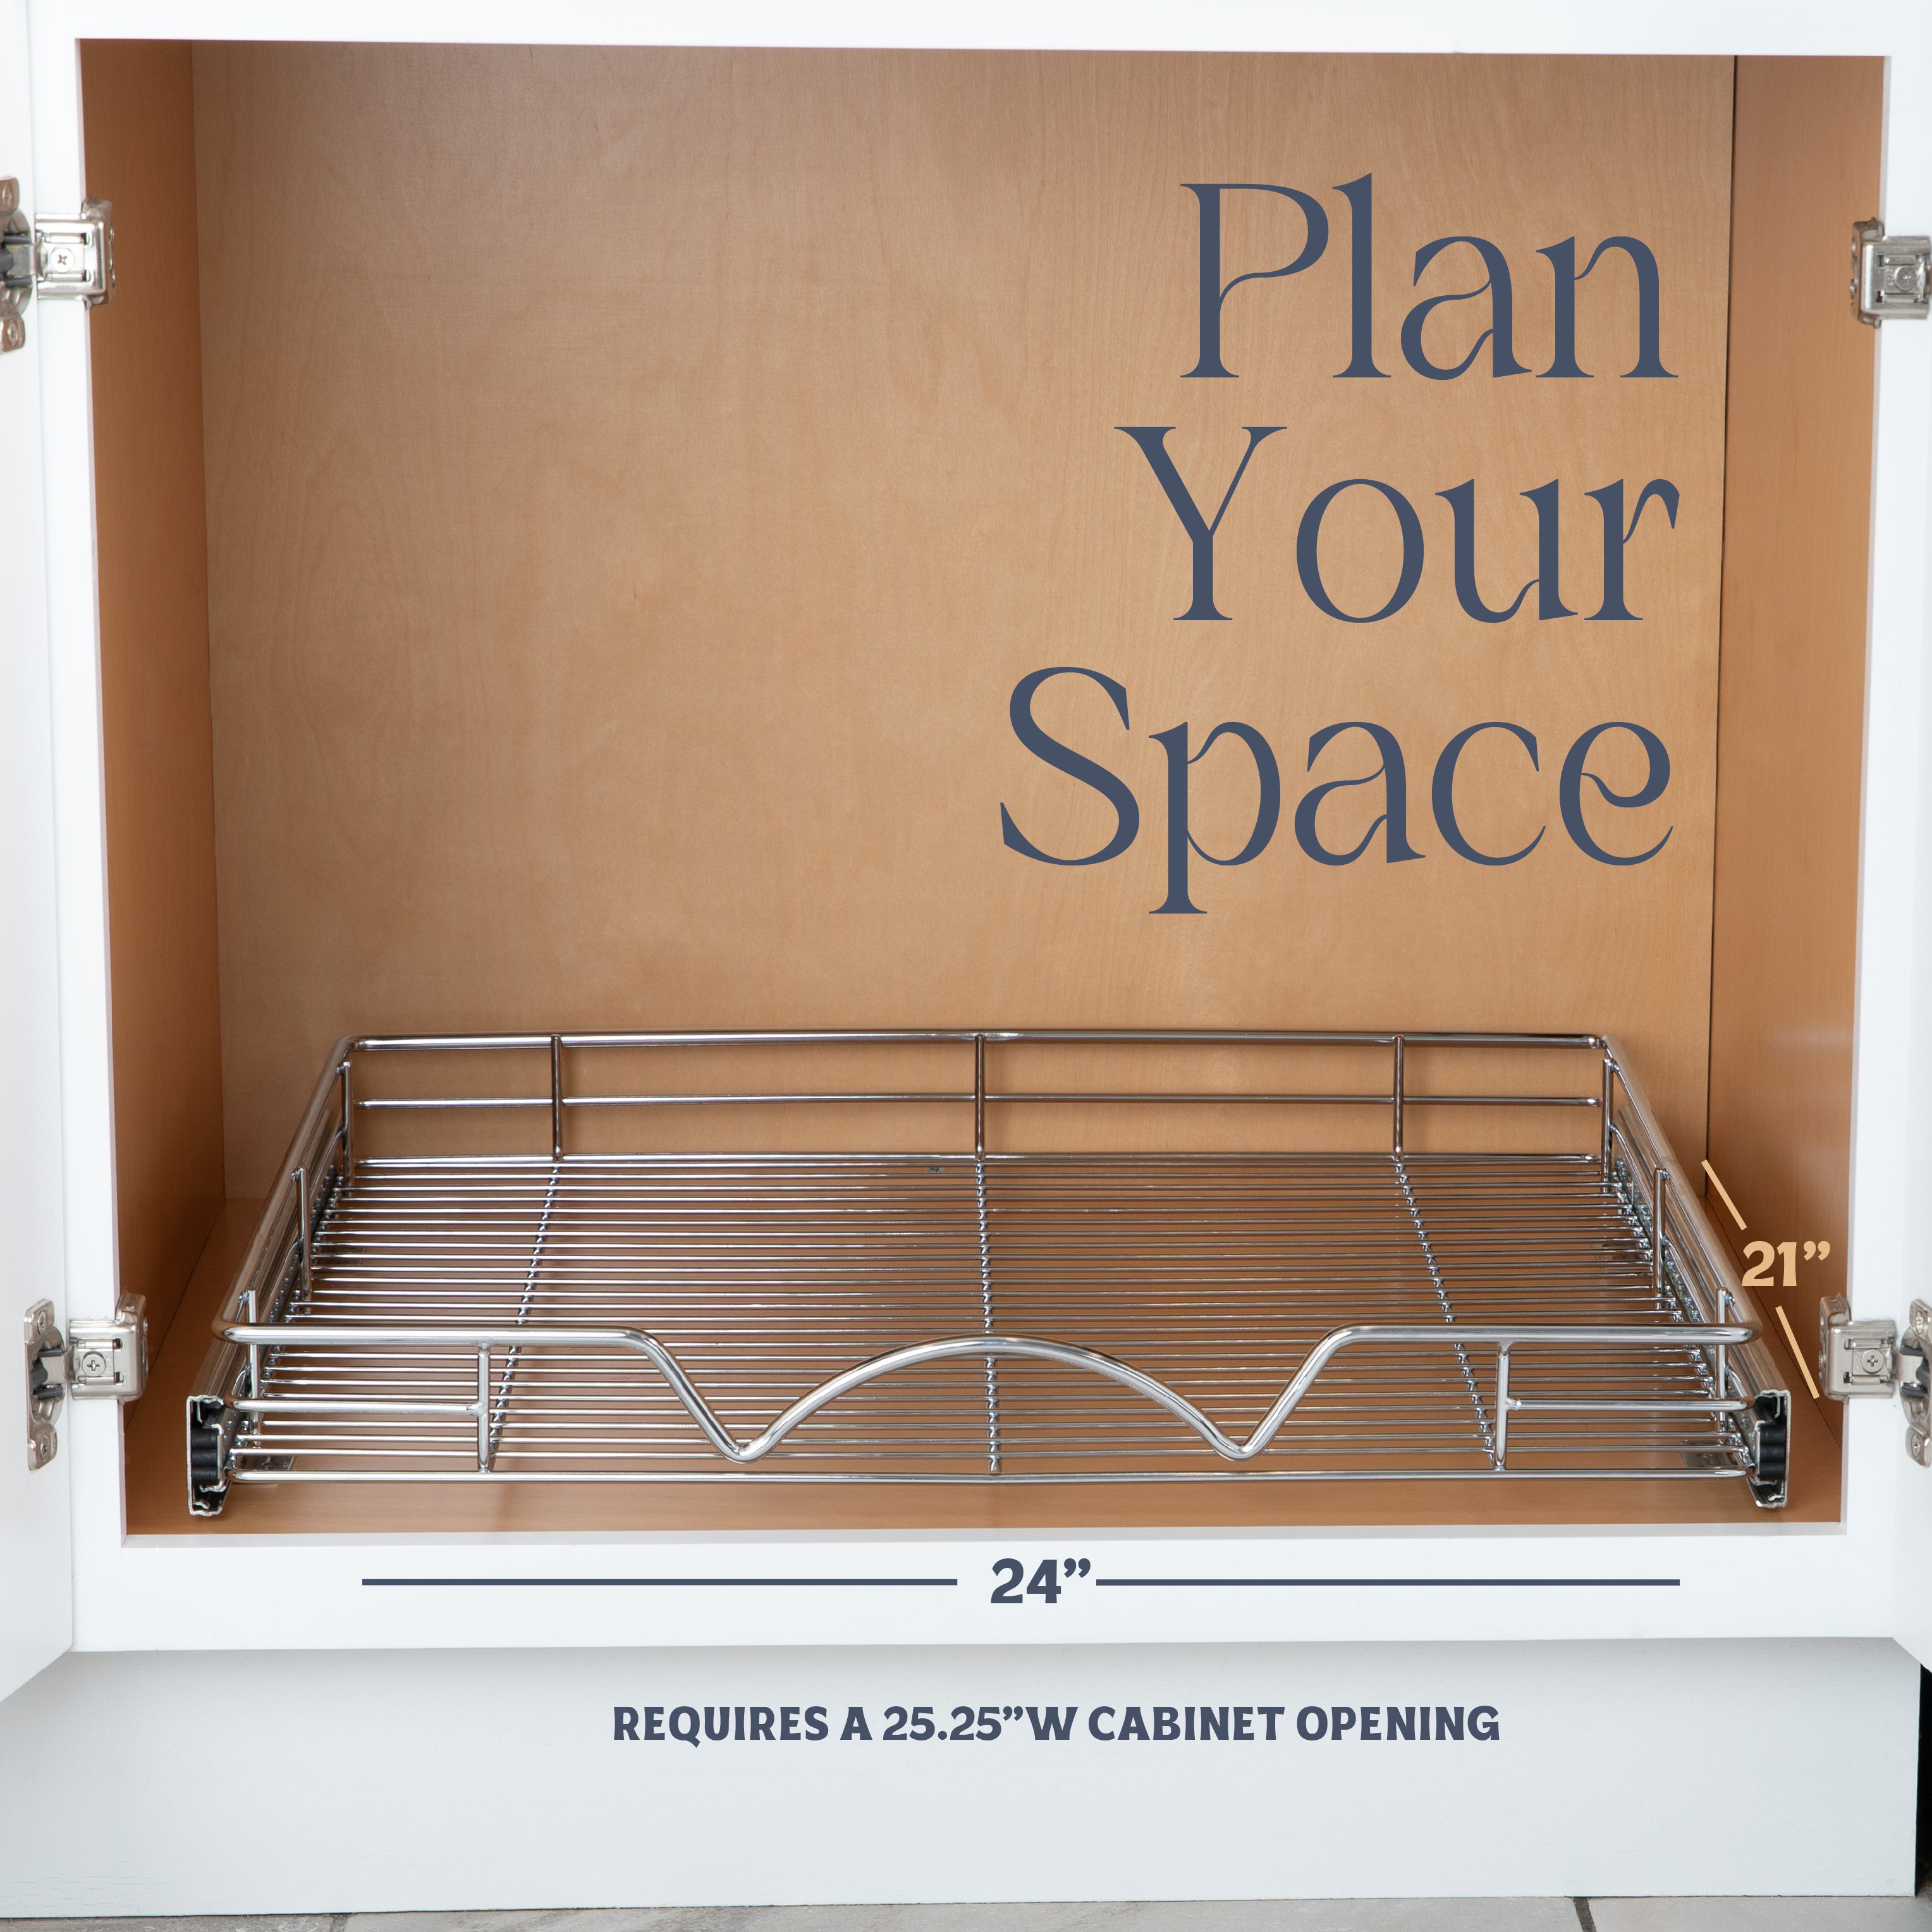 21" Pull Out Cabinet Drawer Organizer, Heavy Duty-with 5 Year Limited Warranty, Chrome Finish